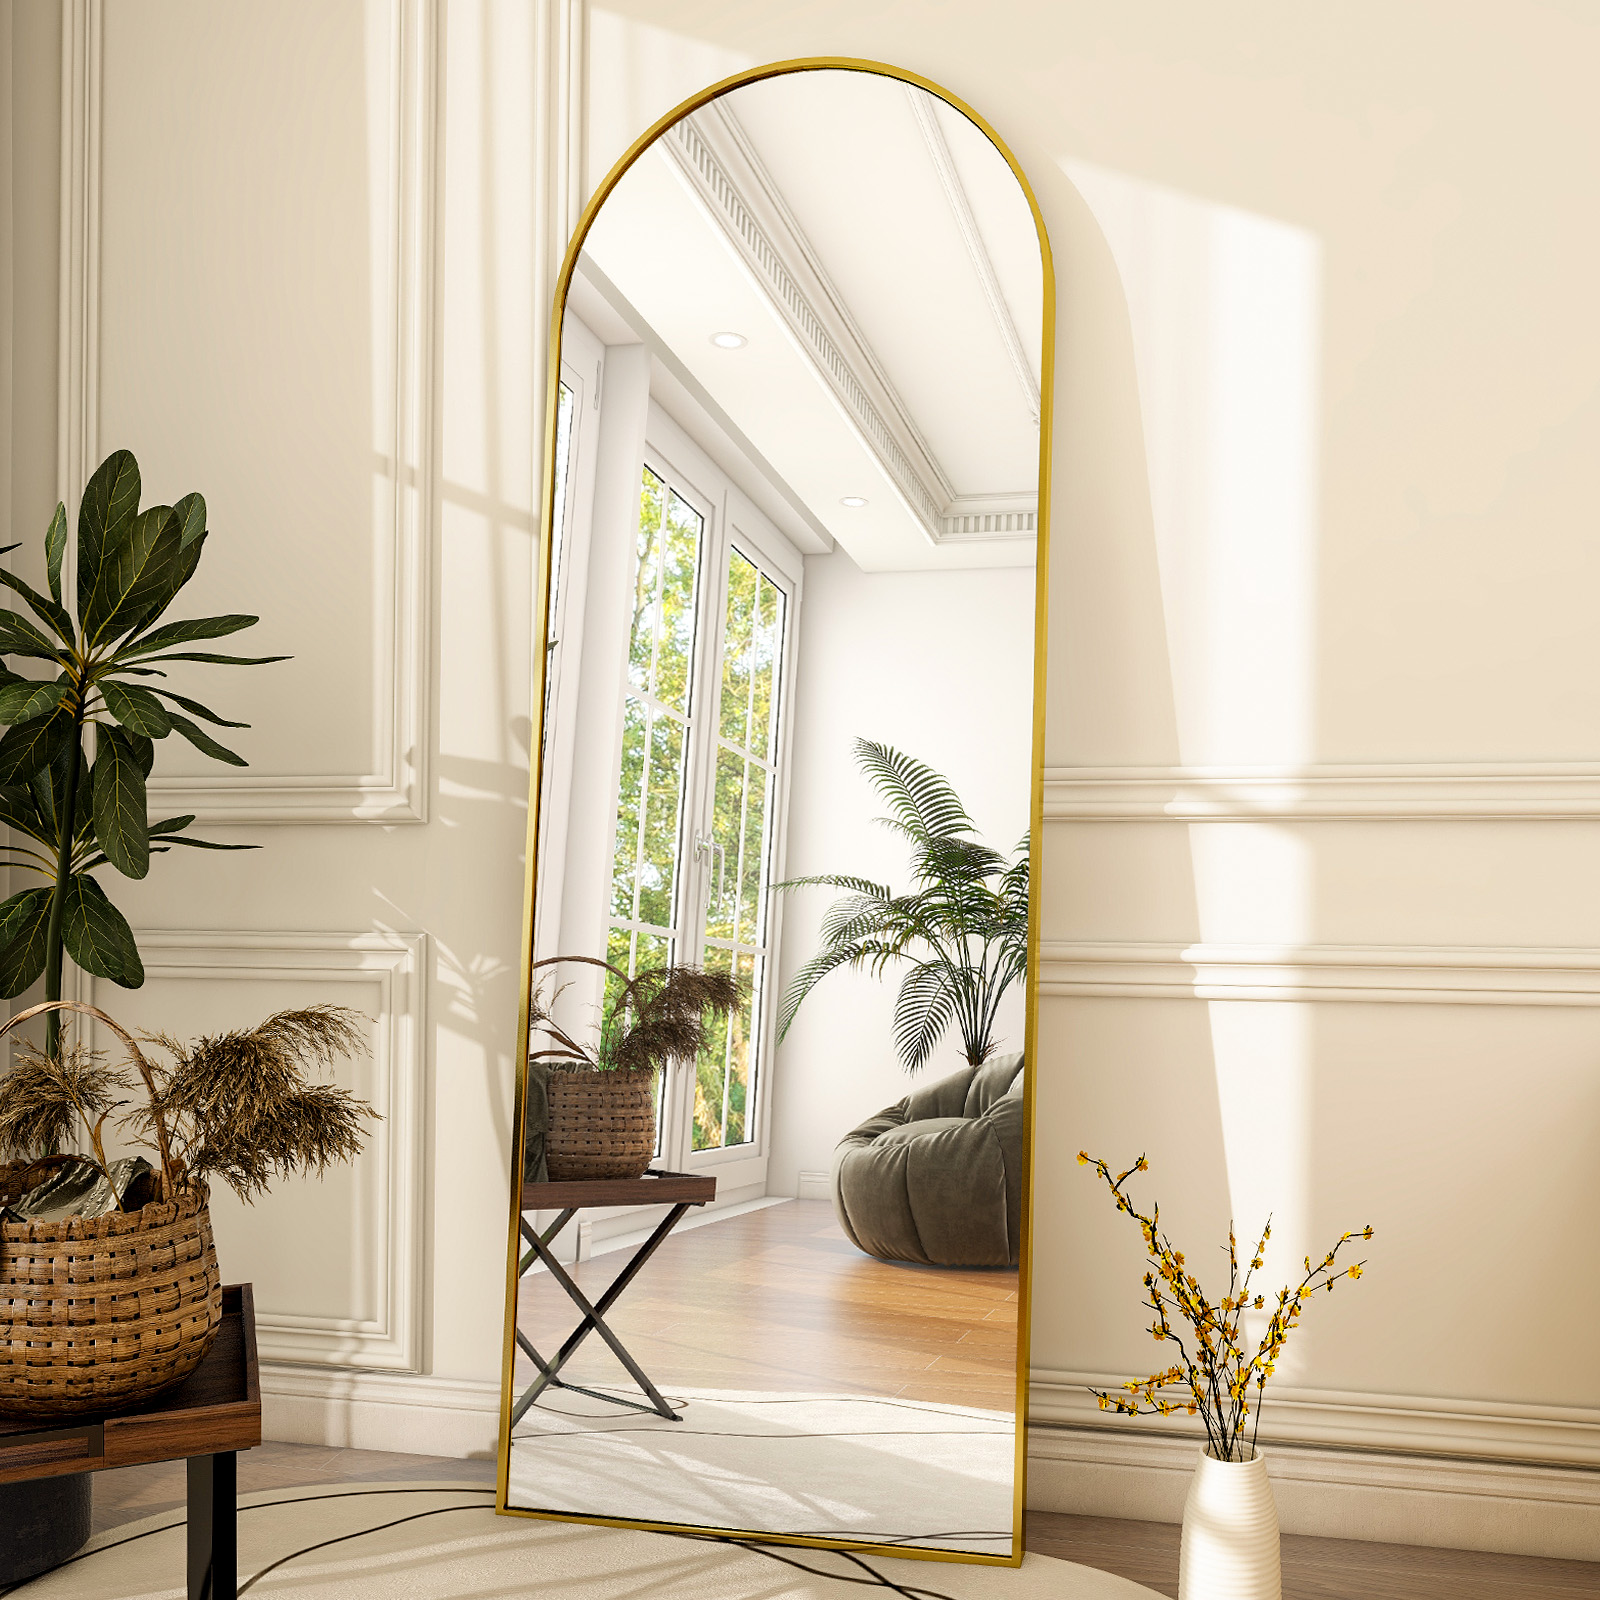 BEAUTYPEAK Arched Full Length Floor Mirror 64"x21.1" Full Body Standing Mirror,Gold - image 3 of 14